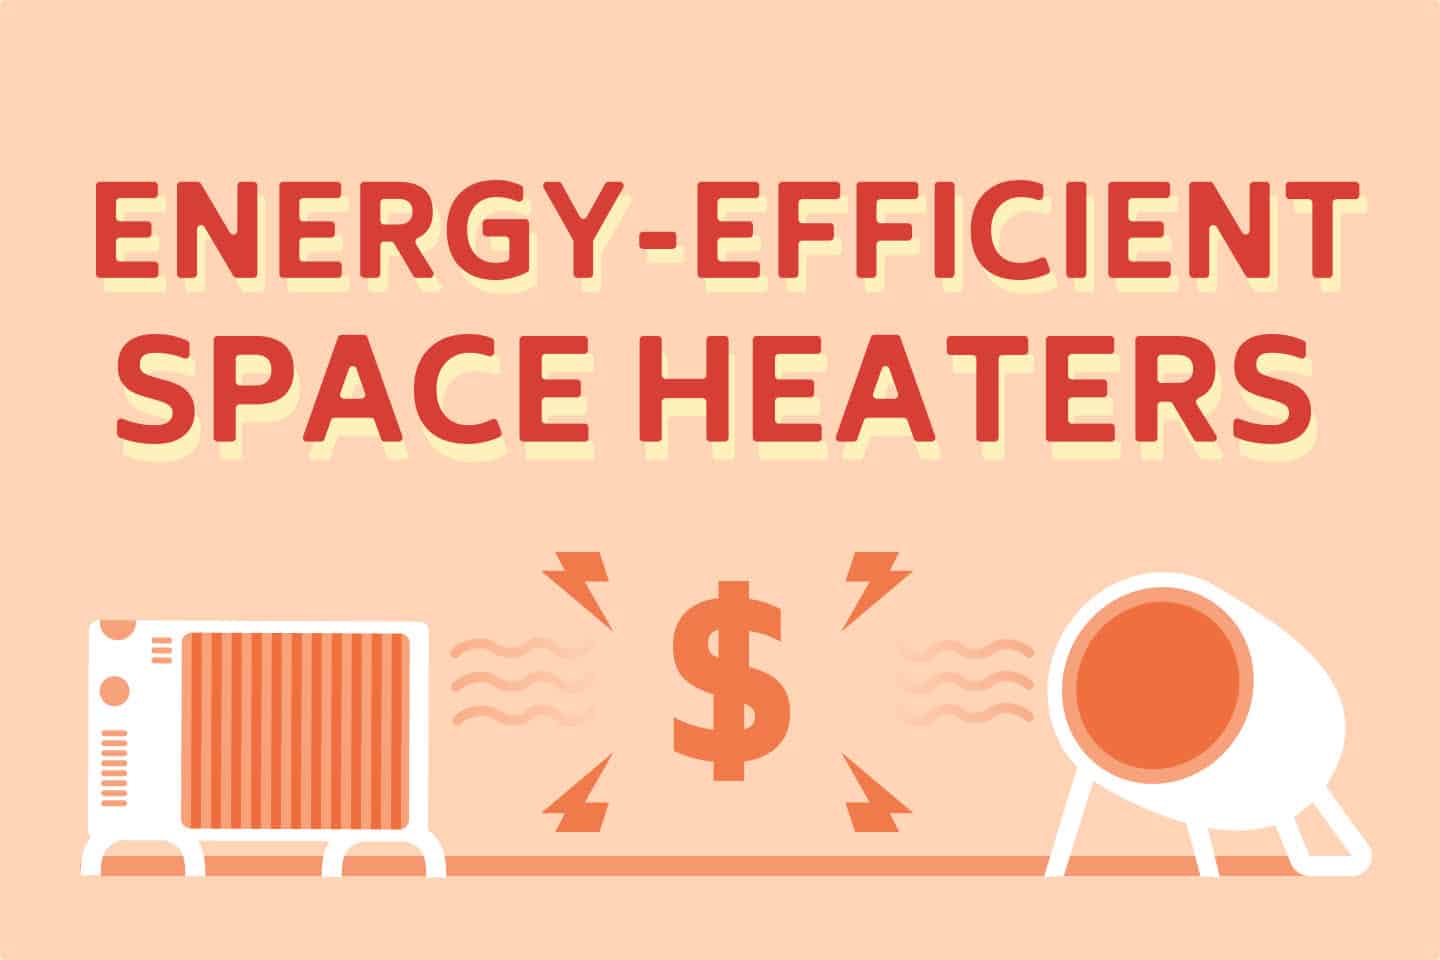 Most Energy-Efficient Space Heaters for 2022-2023 Winter